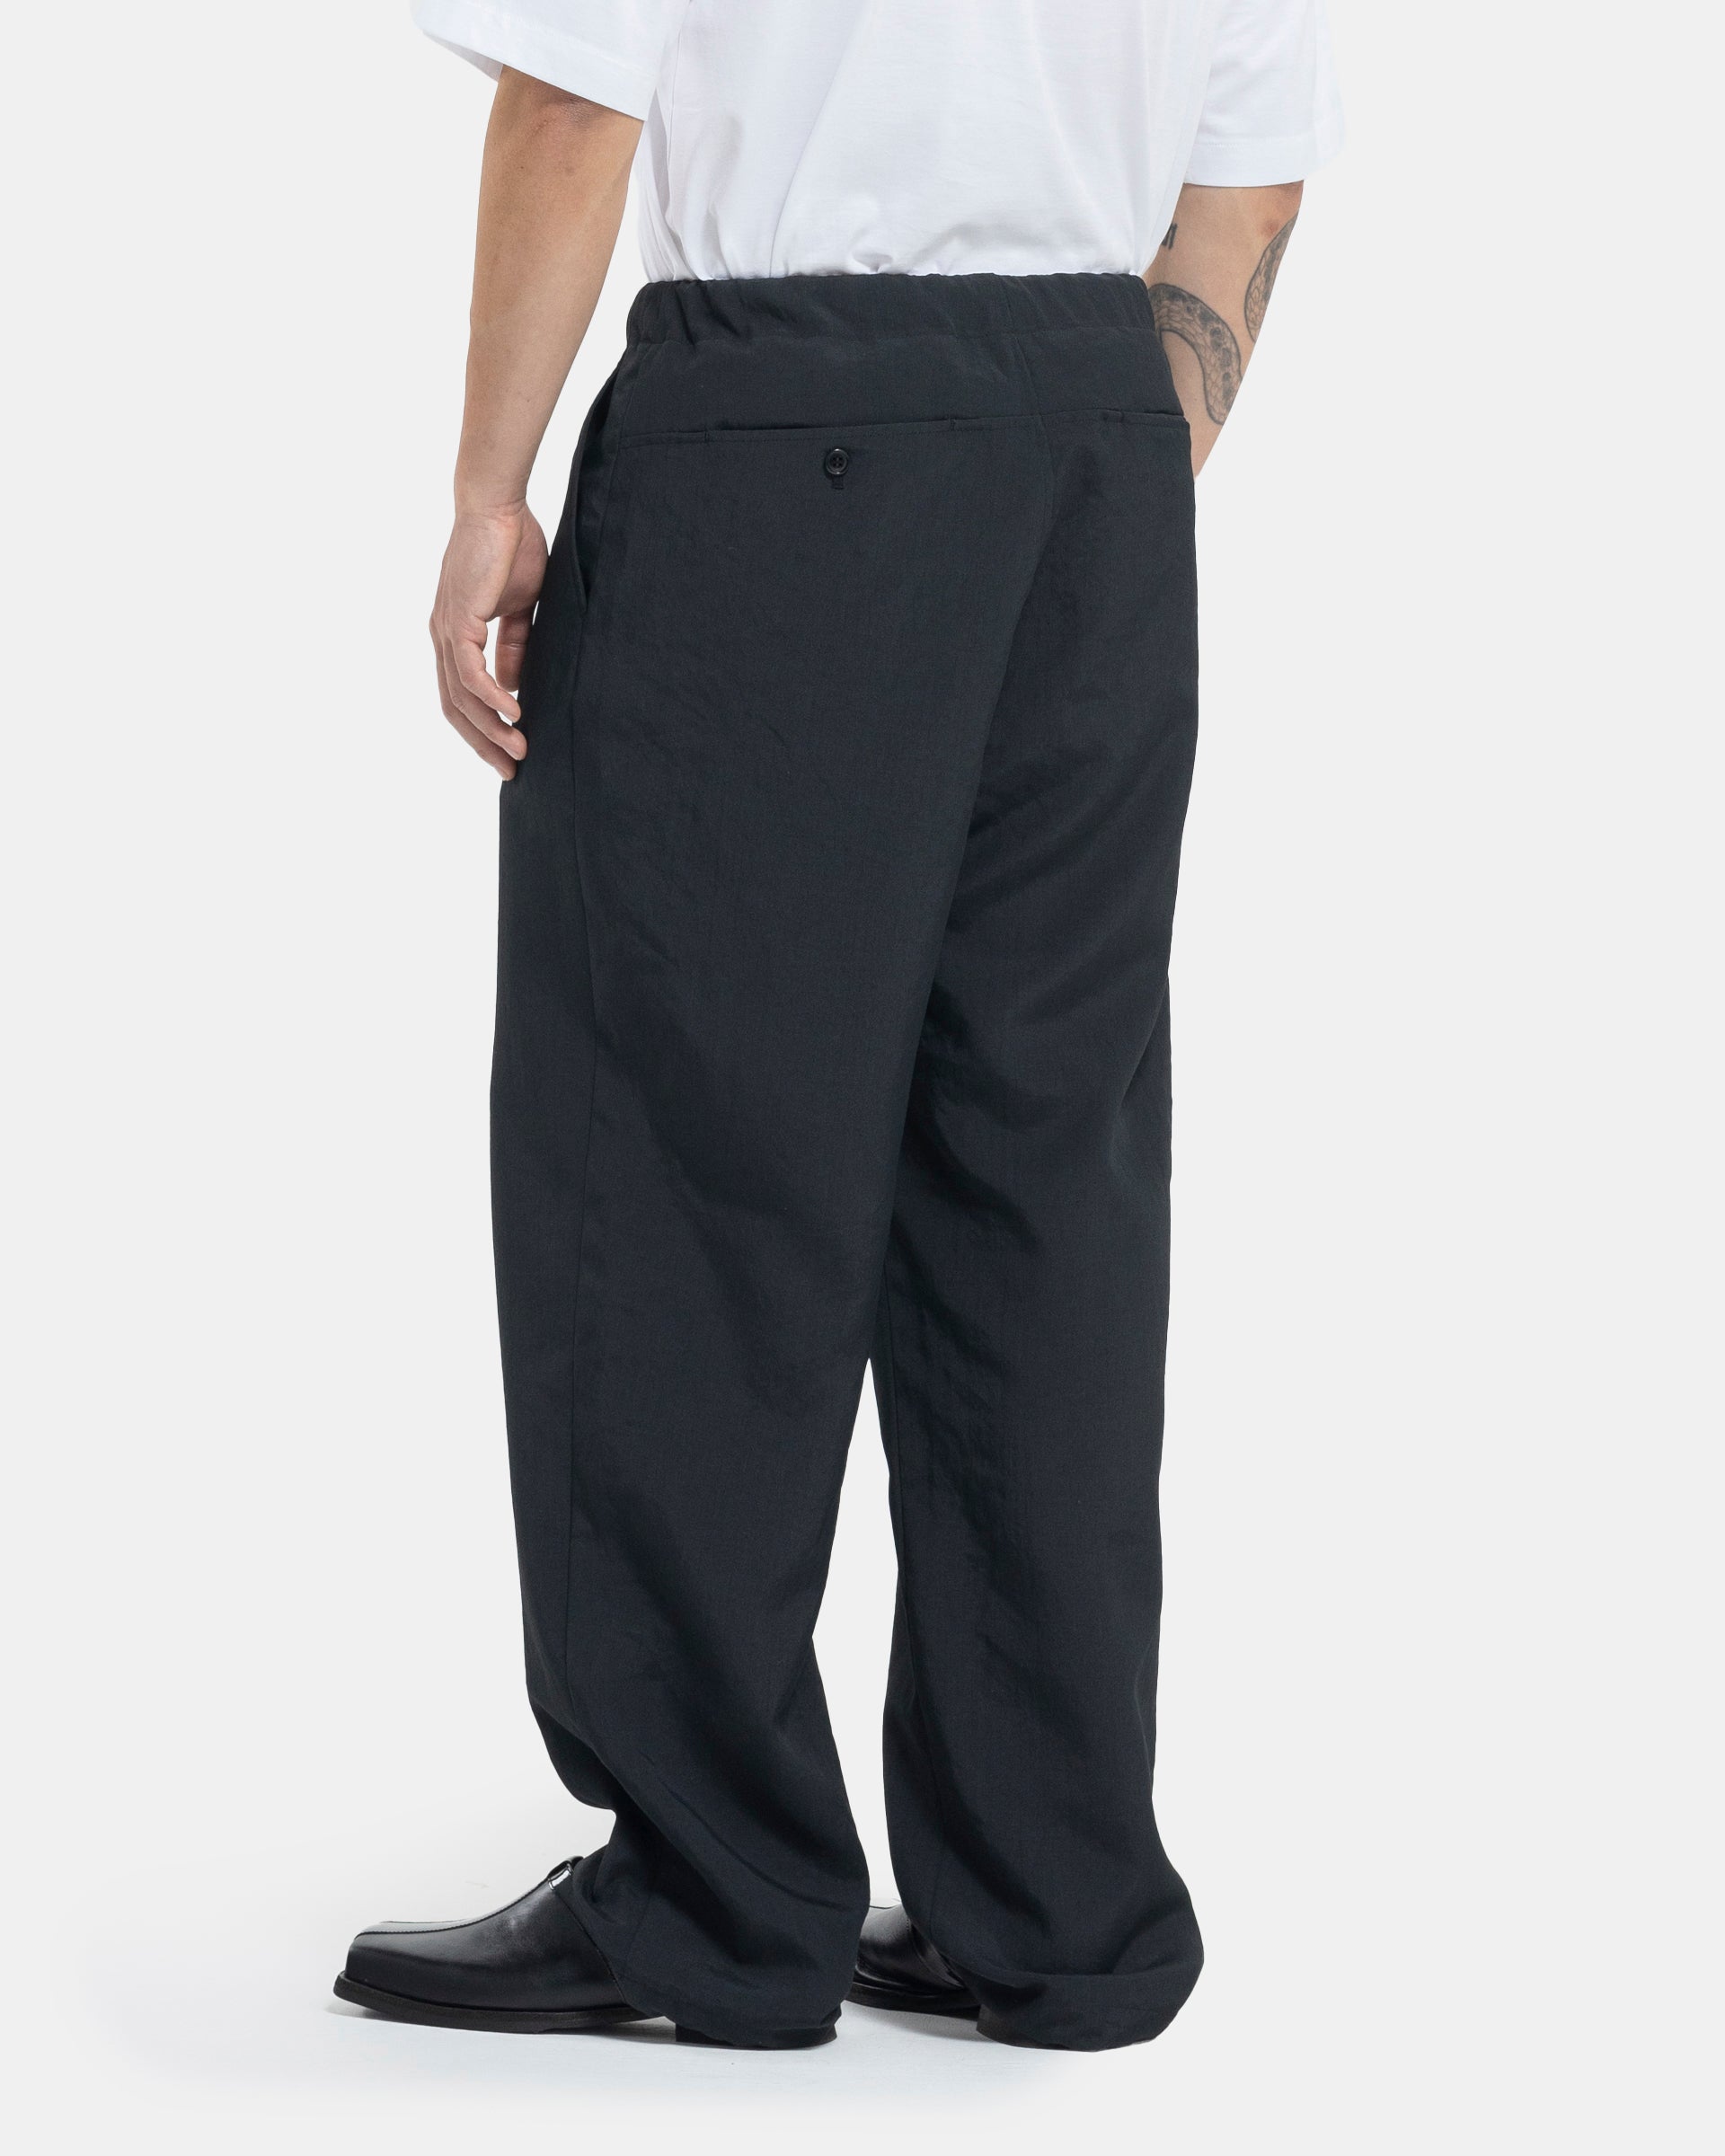 Male model wearing black Still By Hand trousers on white background